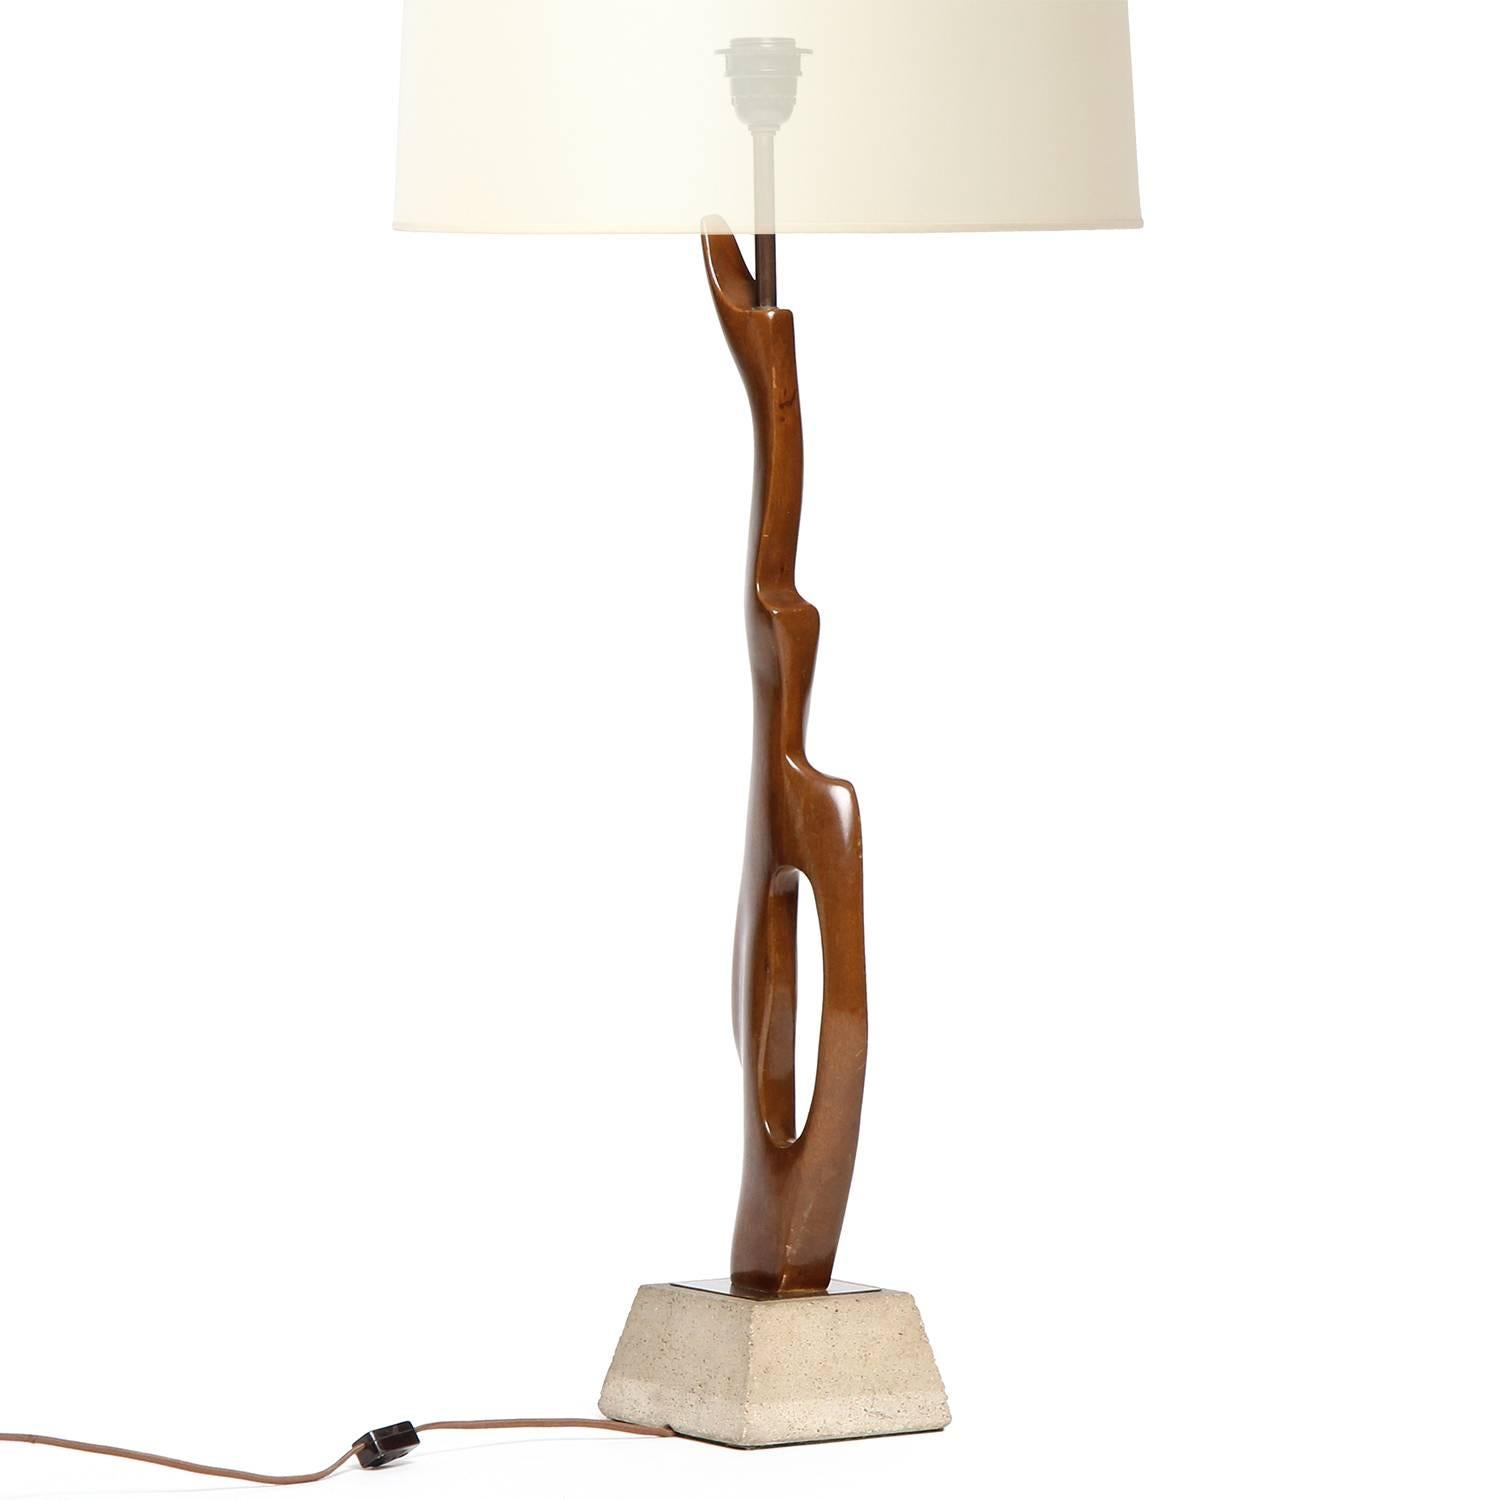 A tall and expressive biomorphic table lamp carved from a single piece of mahogany and mounted on a trapezoidal concrete base.